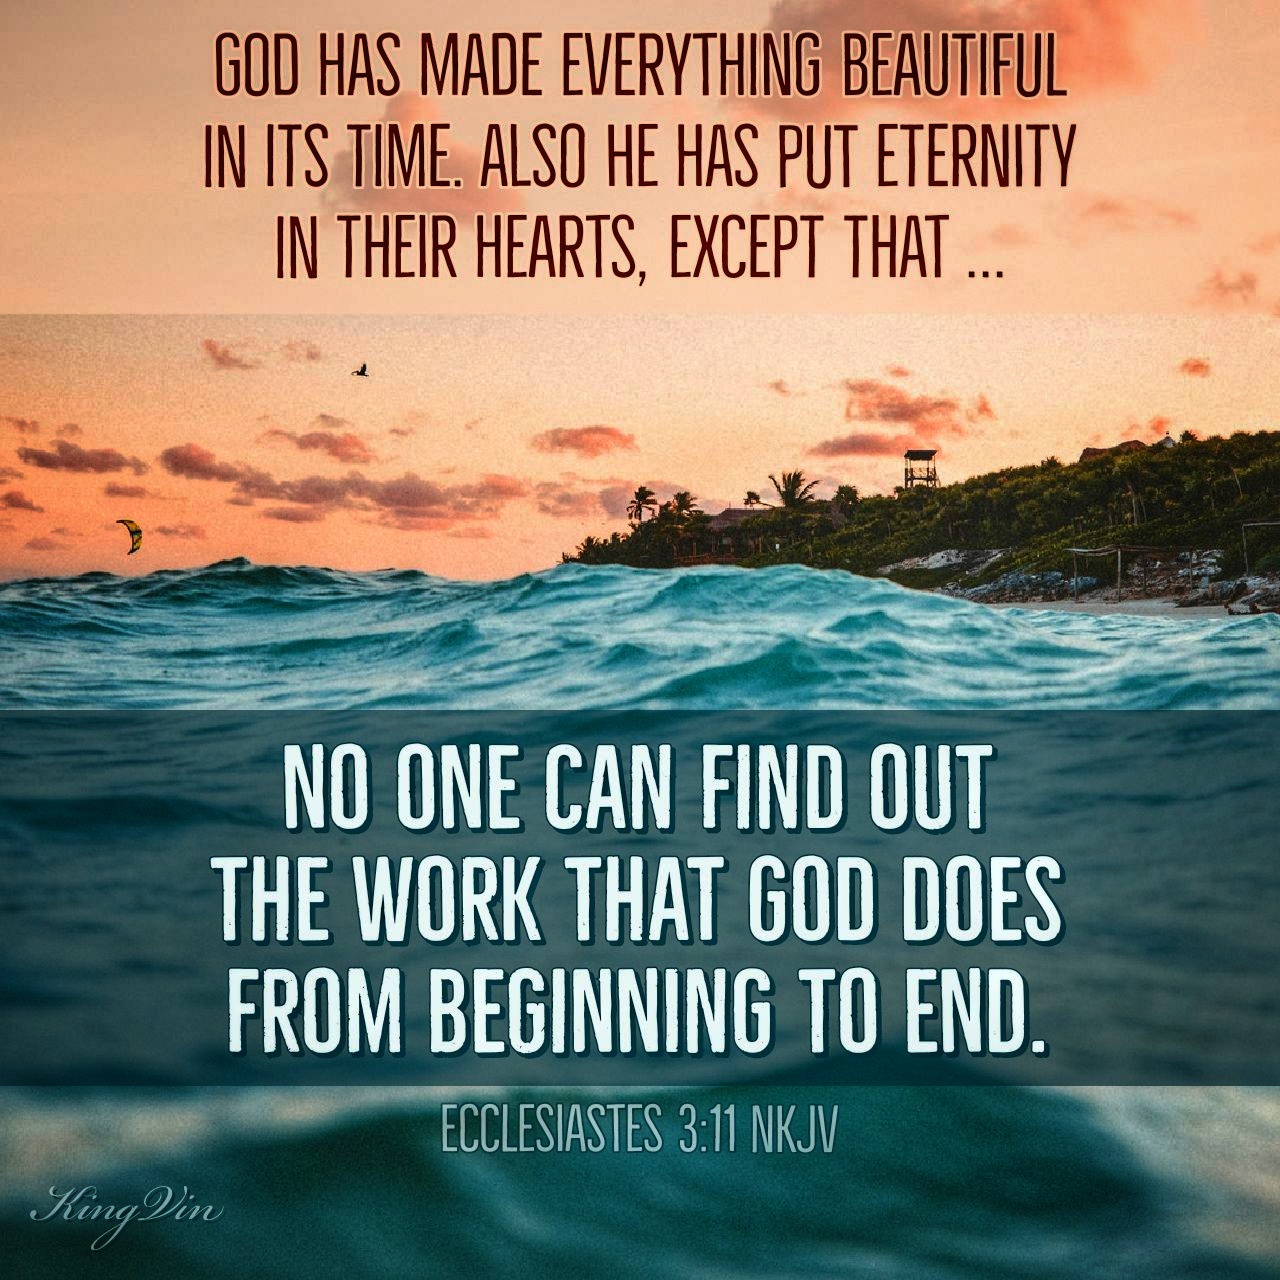 He has made everything beautiful in its time. Also He has put eternity in their hearts, except that no one can find out the work that God does from beginning to end. Ecclesiastes 3:11 NKJV